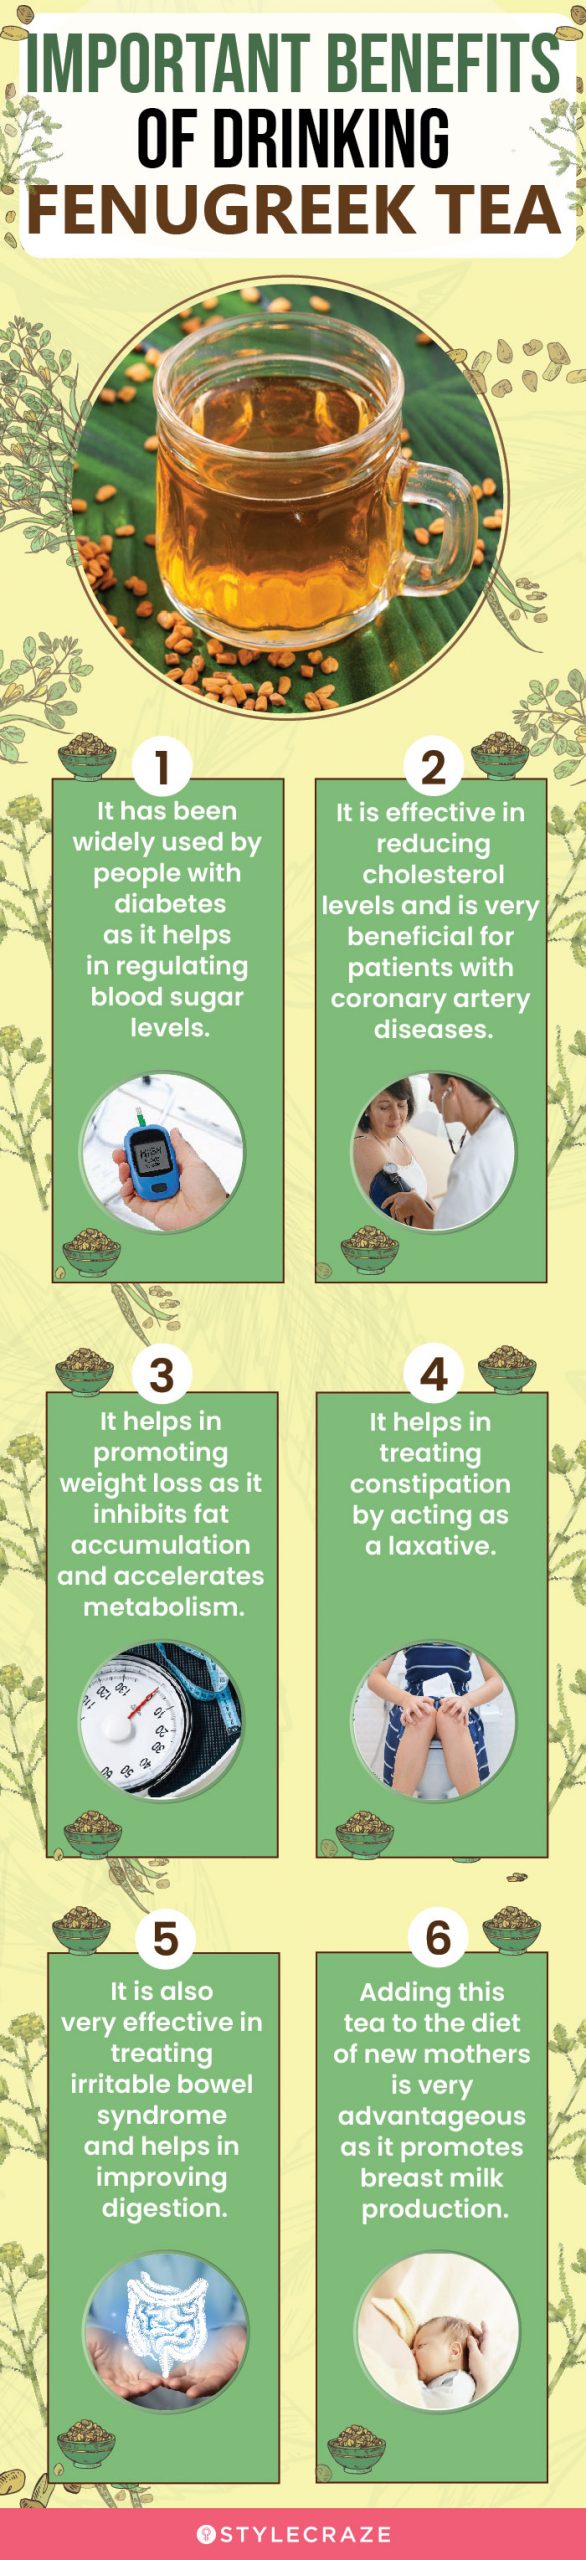 important benefts of drinking fenugreek tea (infographic)